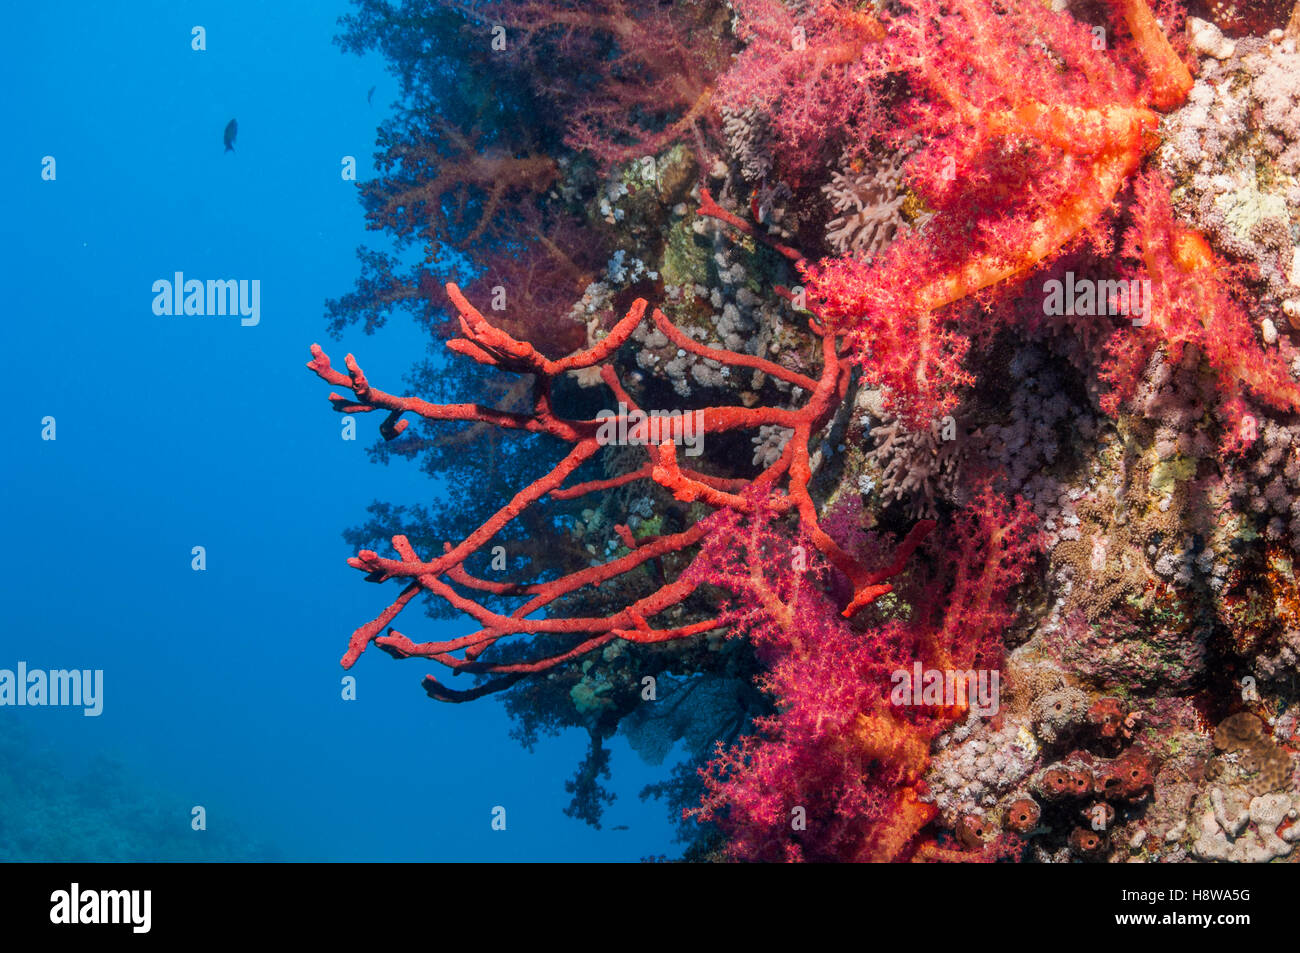 Red rope sponge [Amphimedon compressa] and soft corals [Dendronepthya sp.] on reef wall.  Egypt, Red Sea. Stock Photo